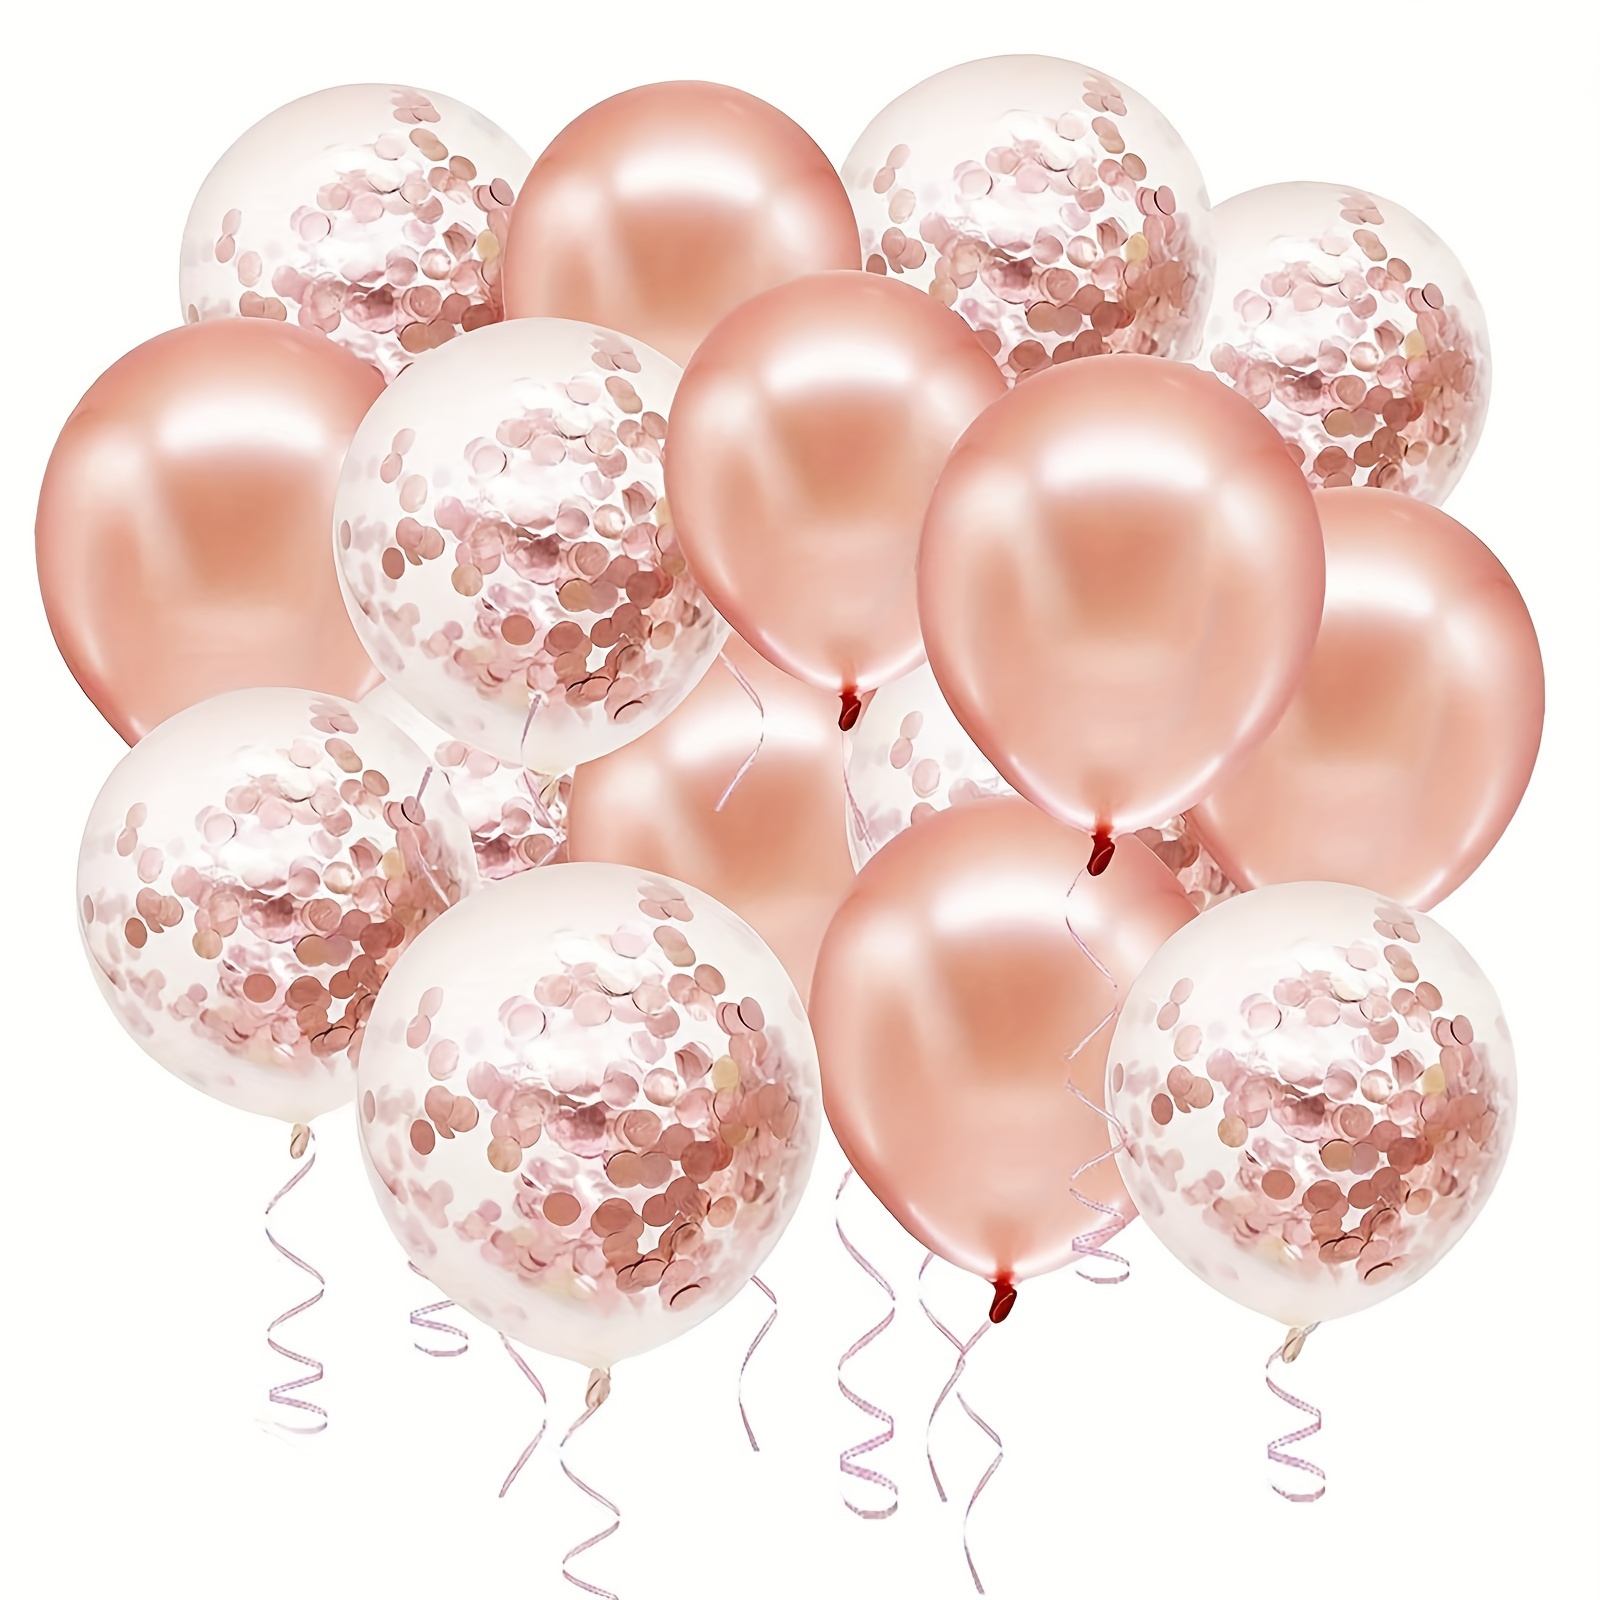 

40pcs, 12inch Rose Golden Confetti Latex Balloons For Birthday Anniversaries, Valentine's Day, Gender Reveals, Parties, Weddings, Bridal Showers Decorations.